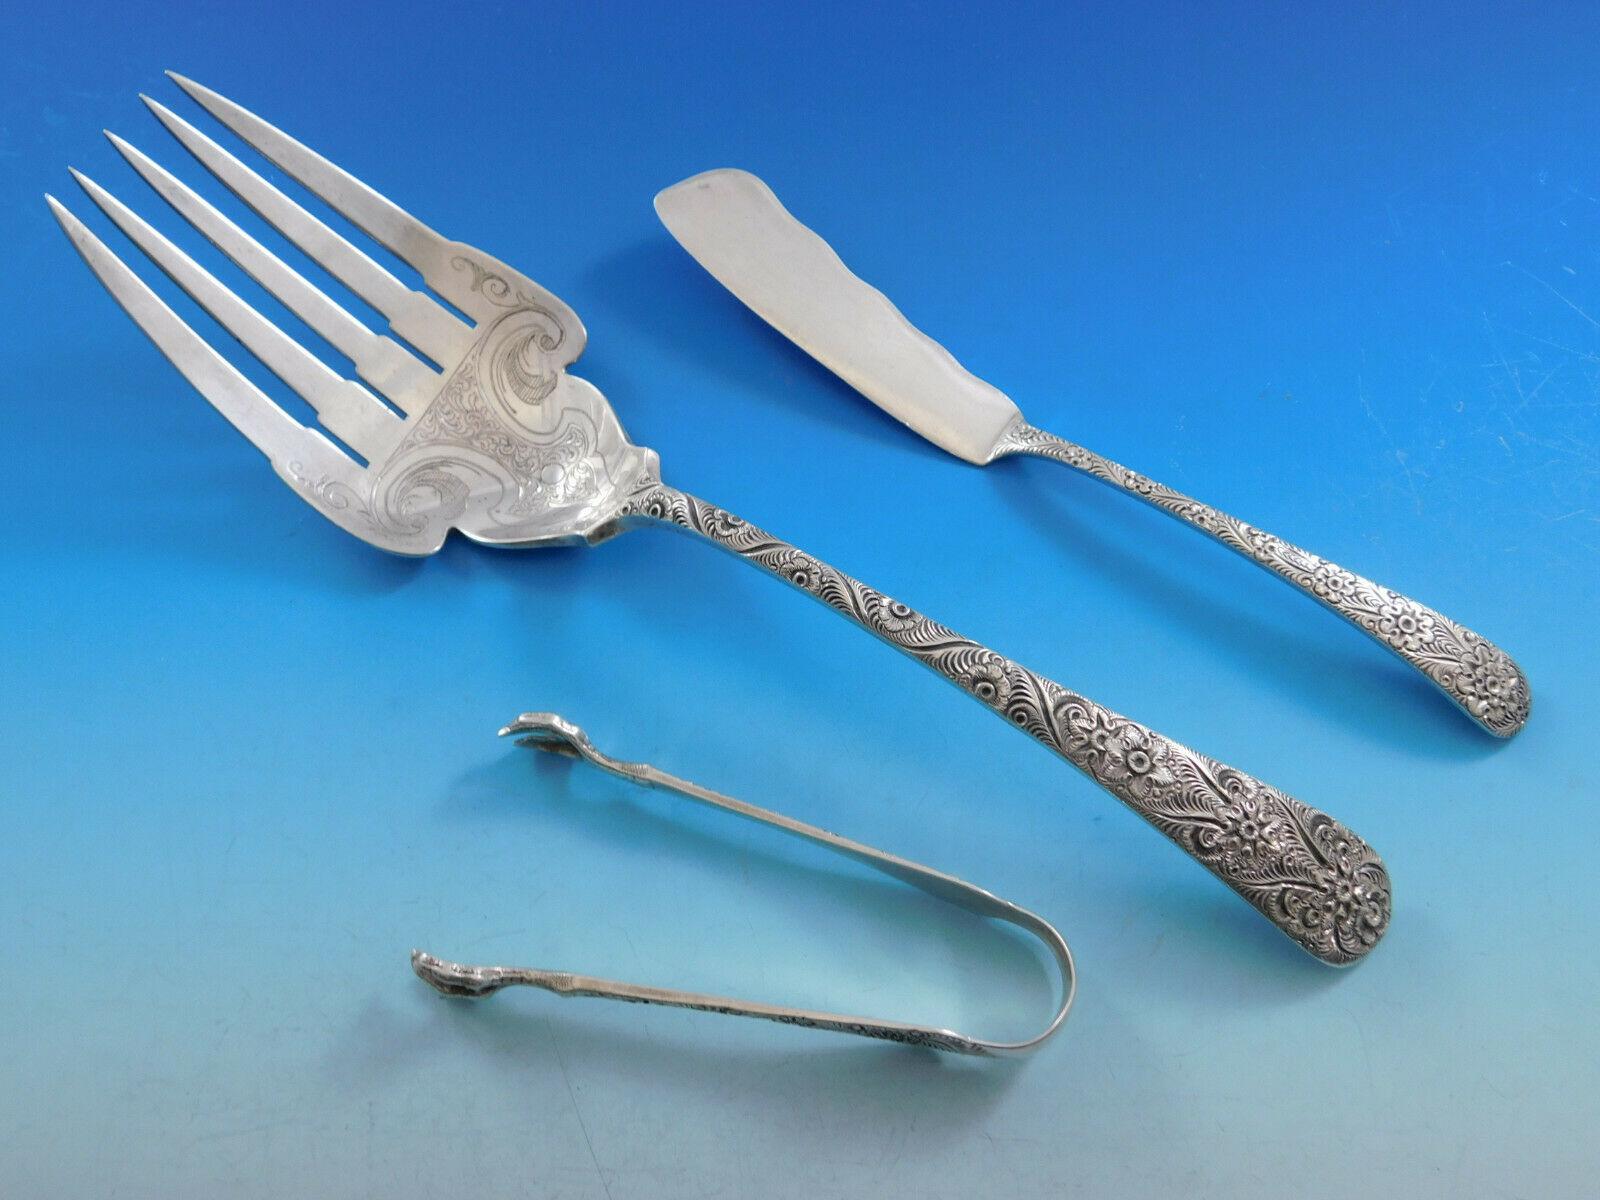 most expensive silverware